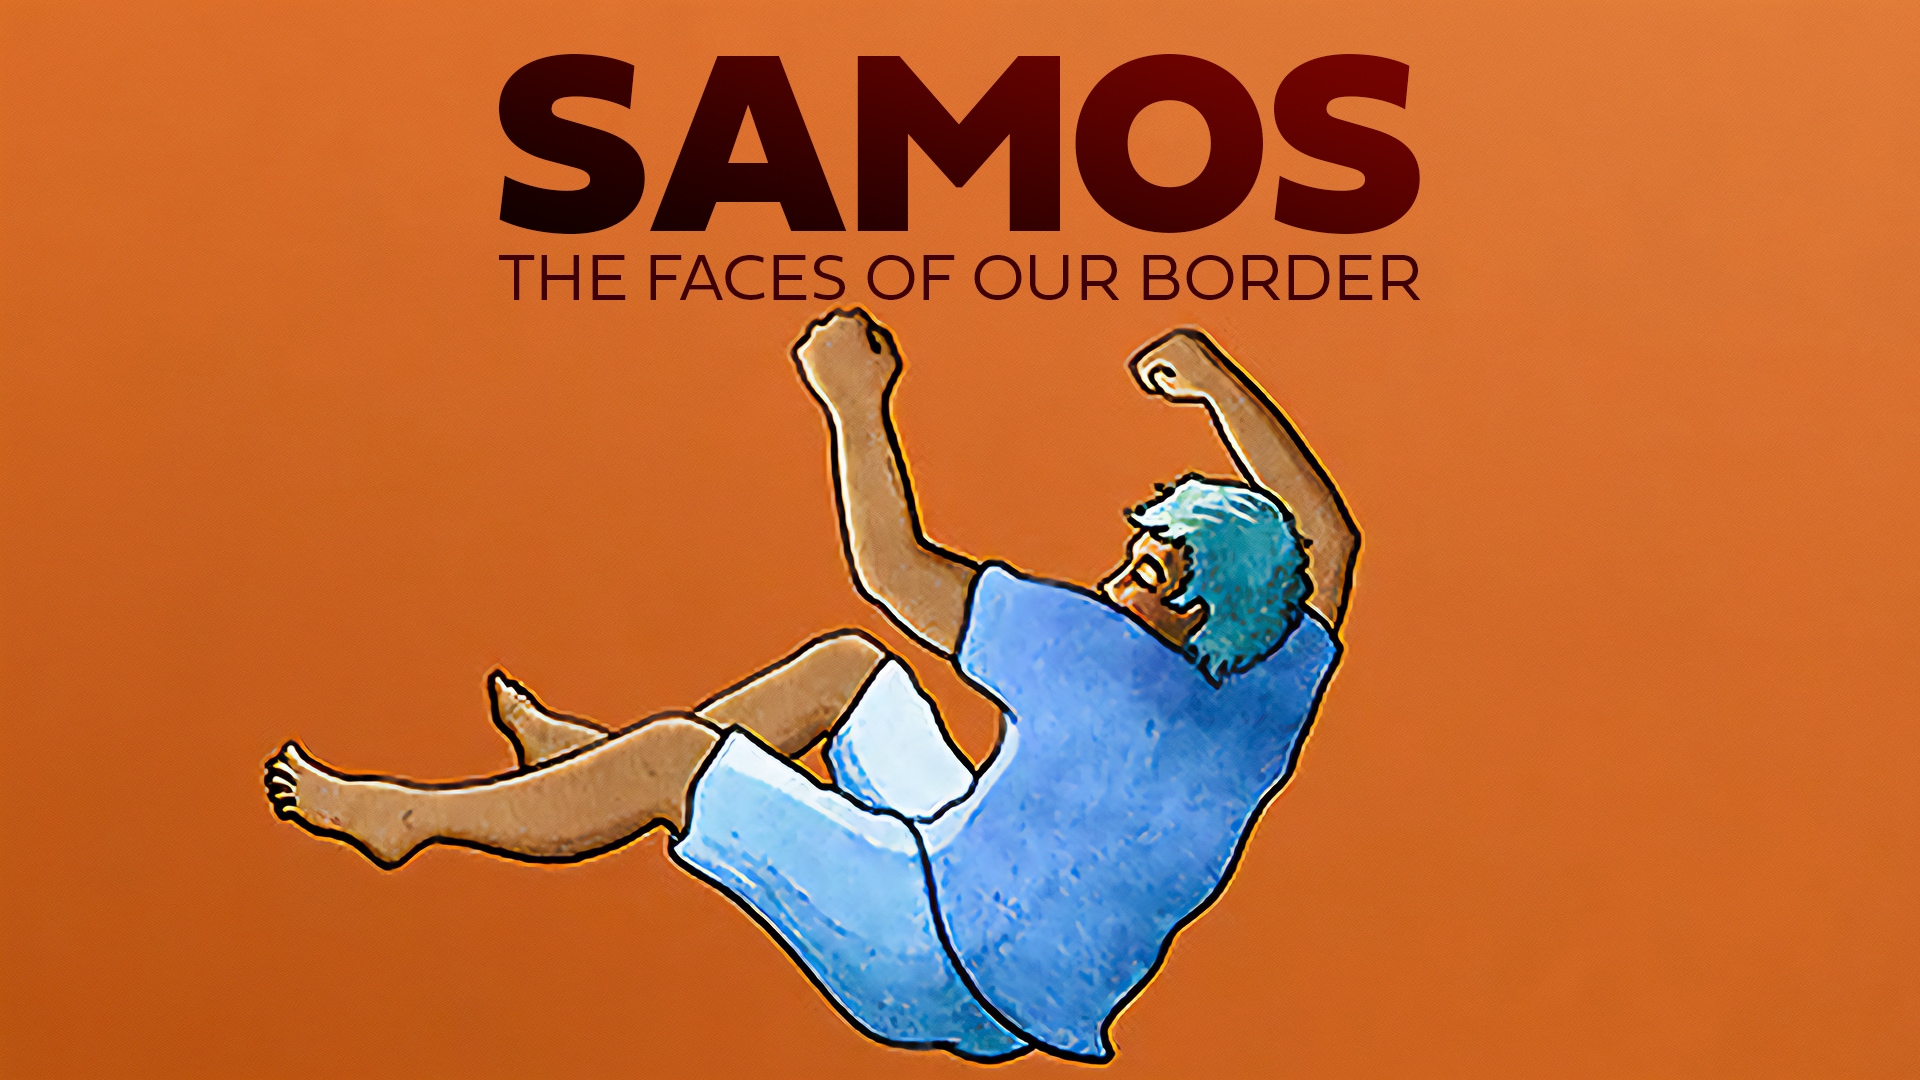 Samos, The Faces of our Border